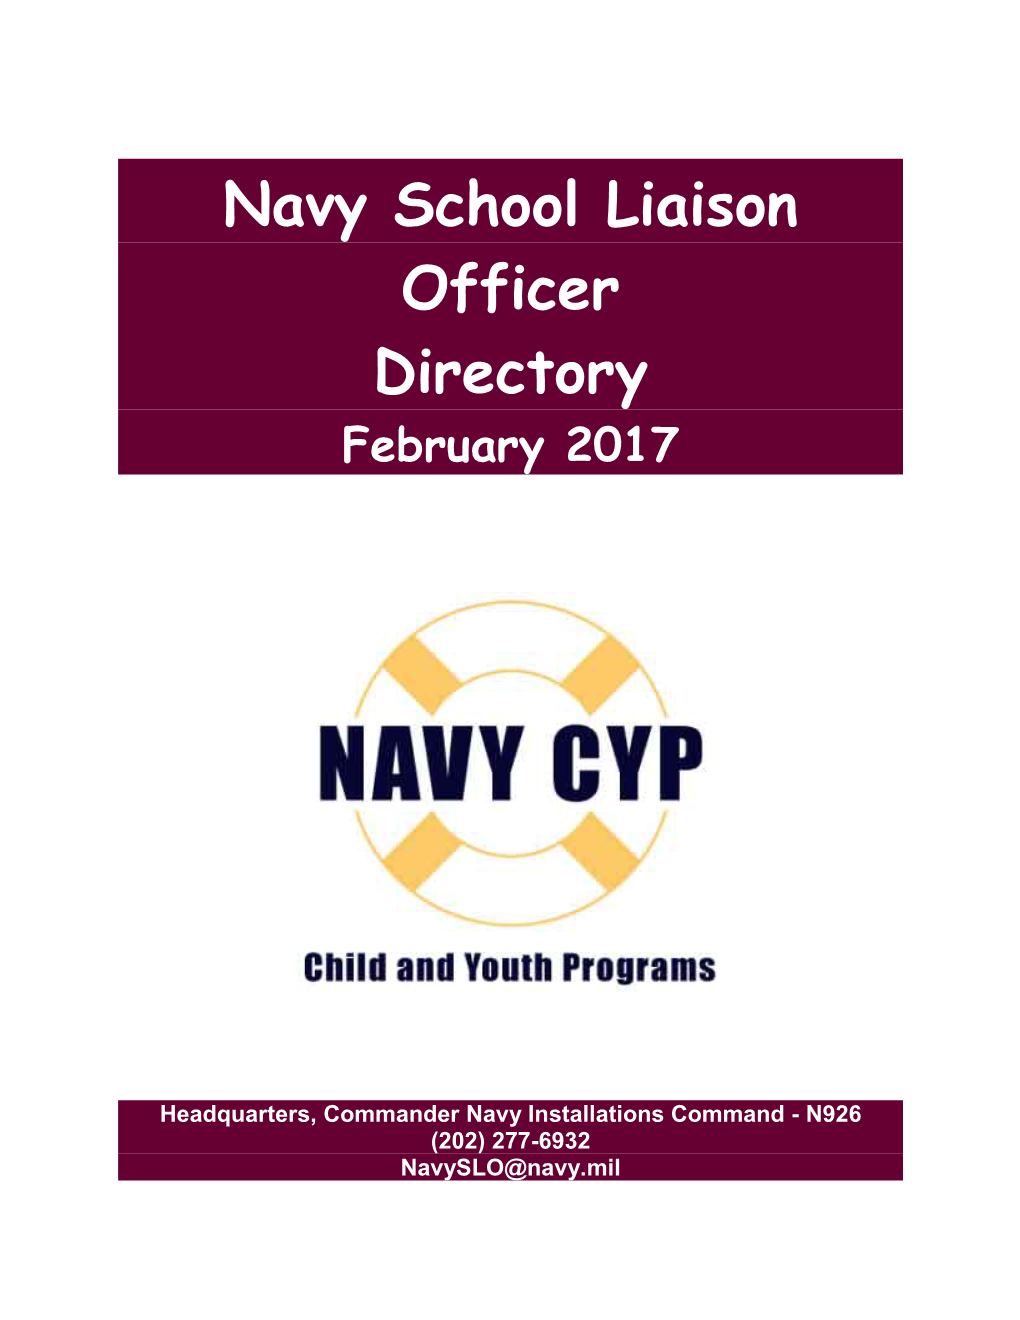 Navy School Liaison Officer Directory February 2017